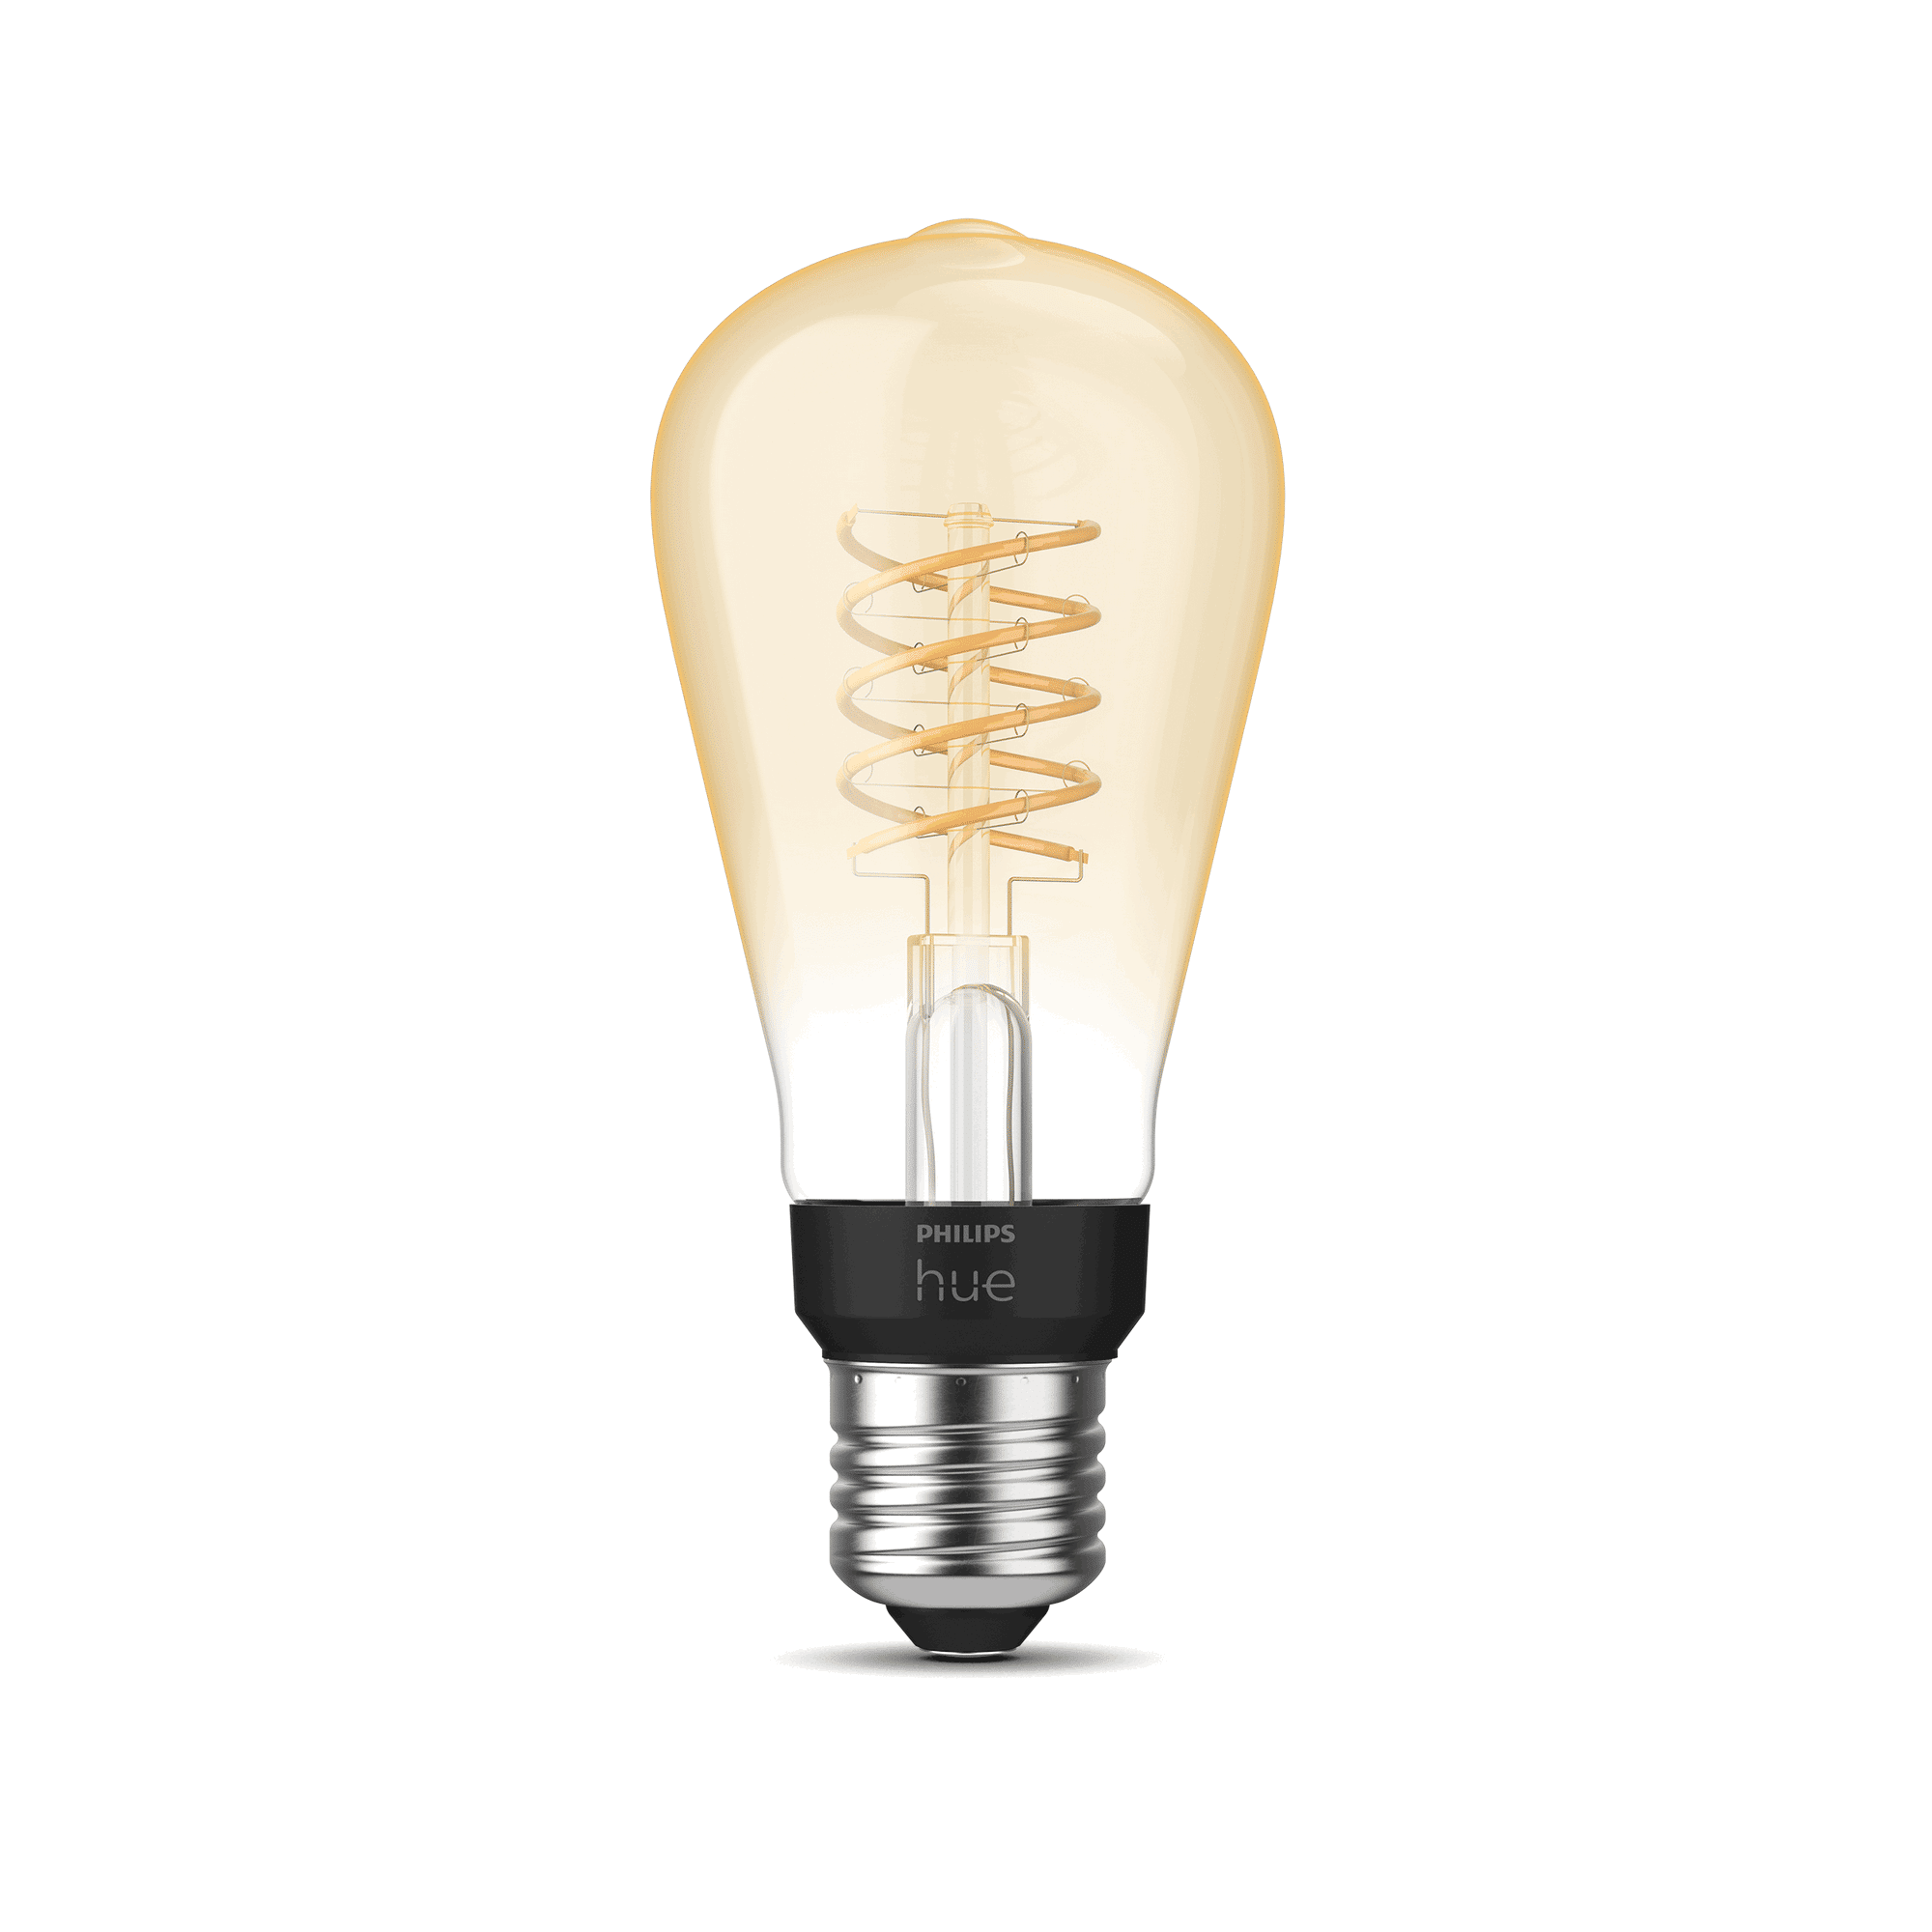 LED-Filament-Lampe 'Philips Hue White Fil ST64' E27 7 W 550 lm + product picture